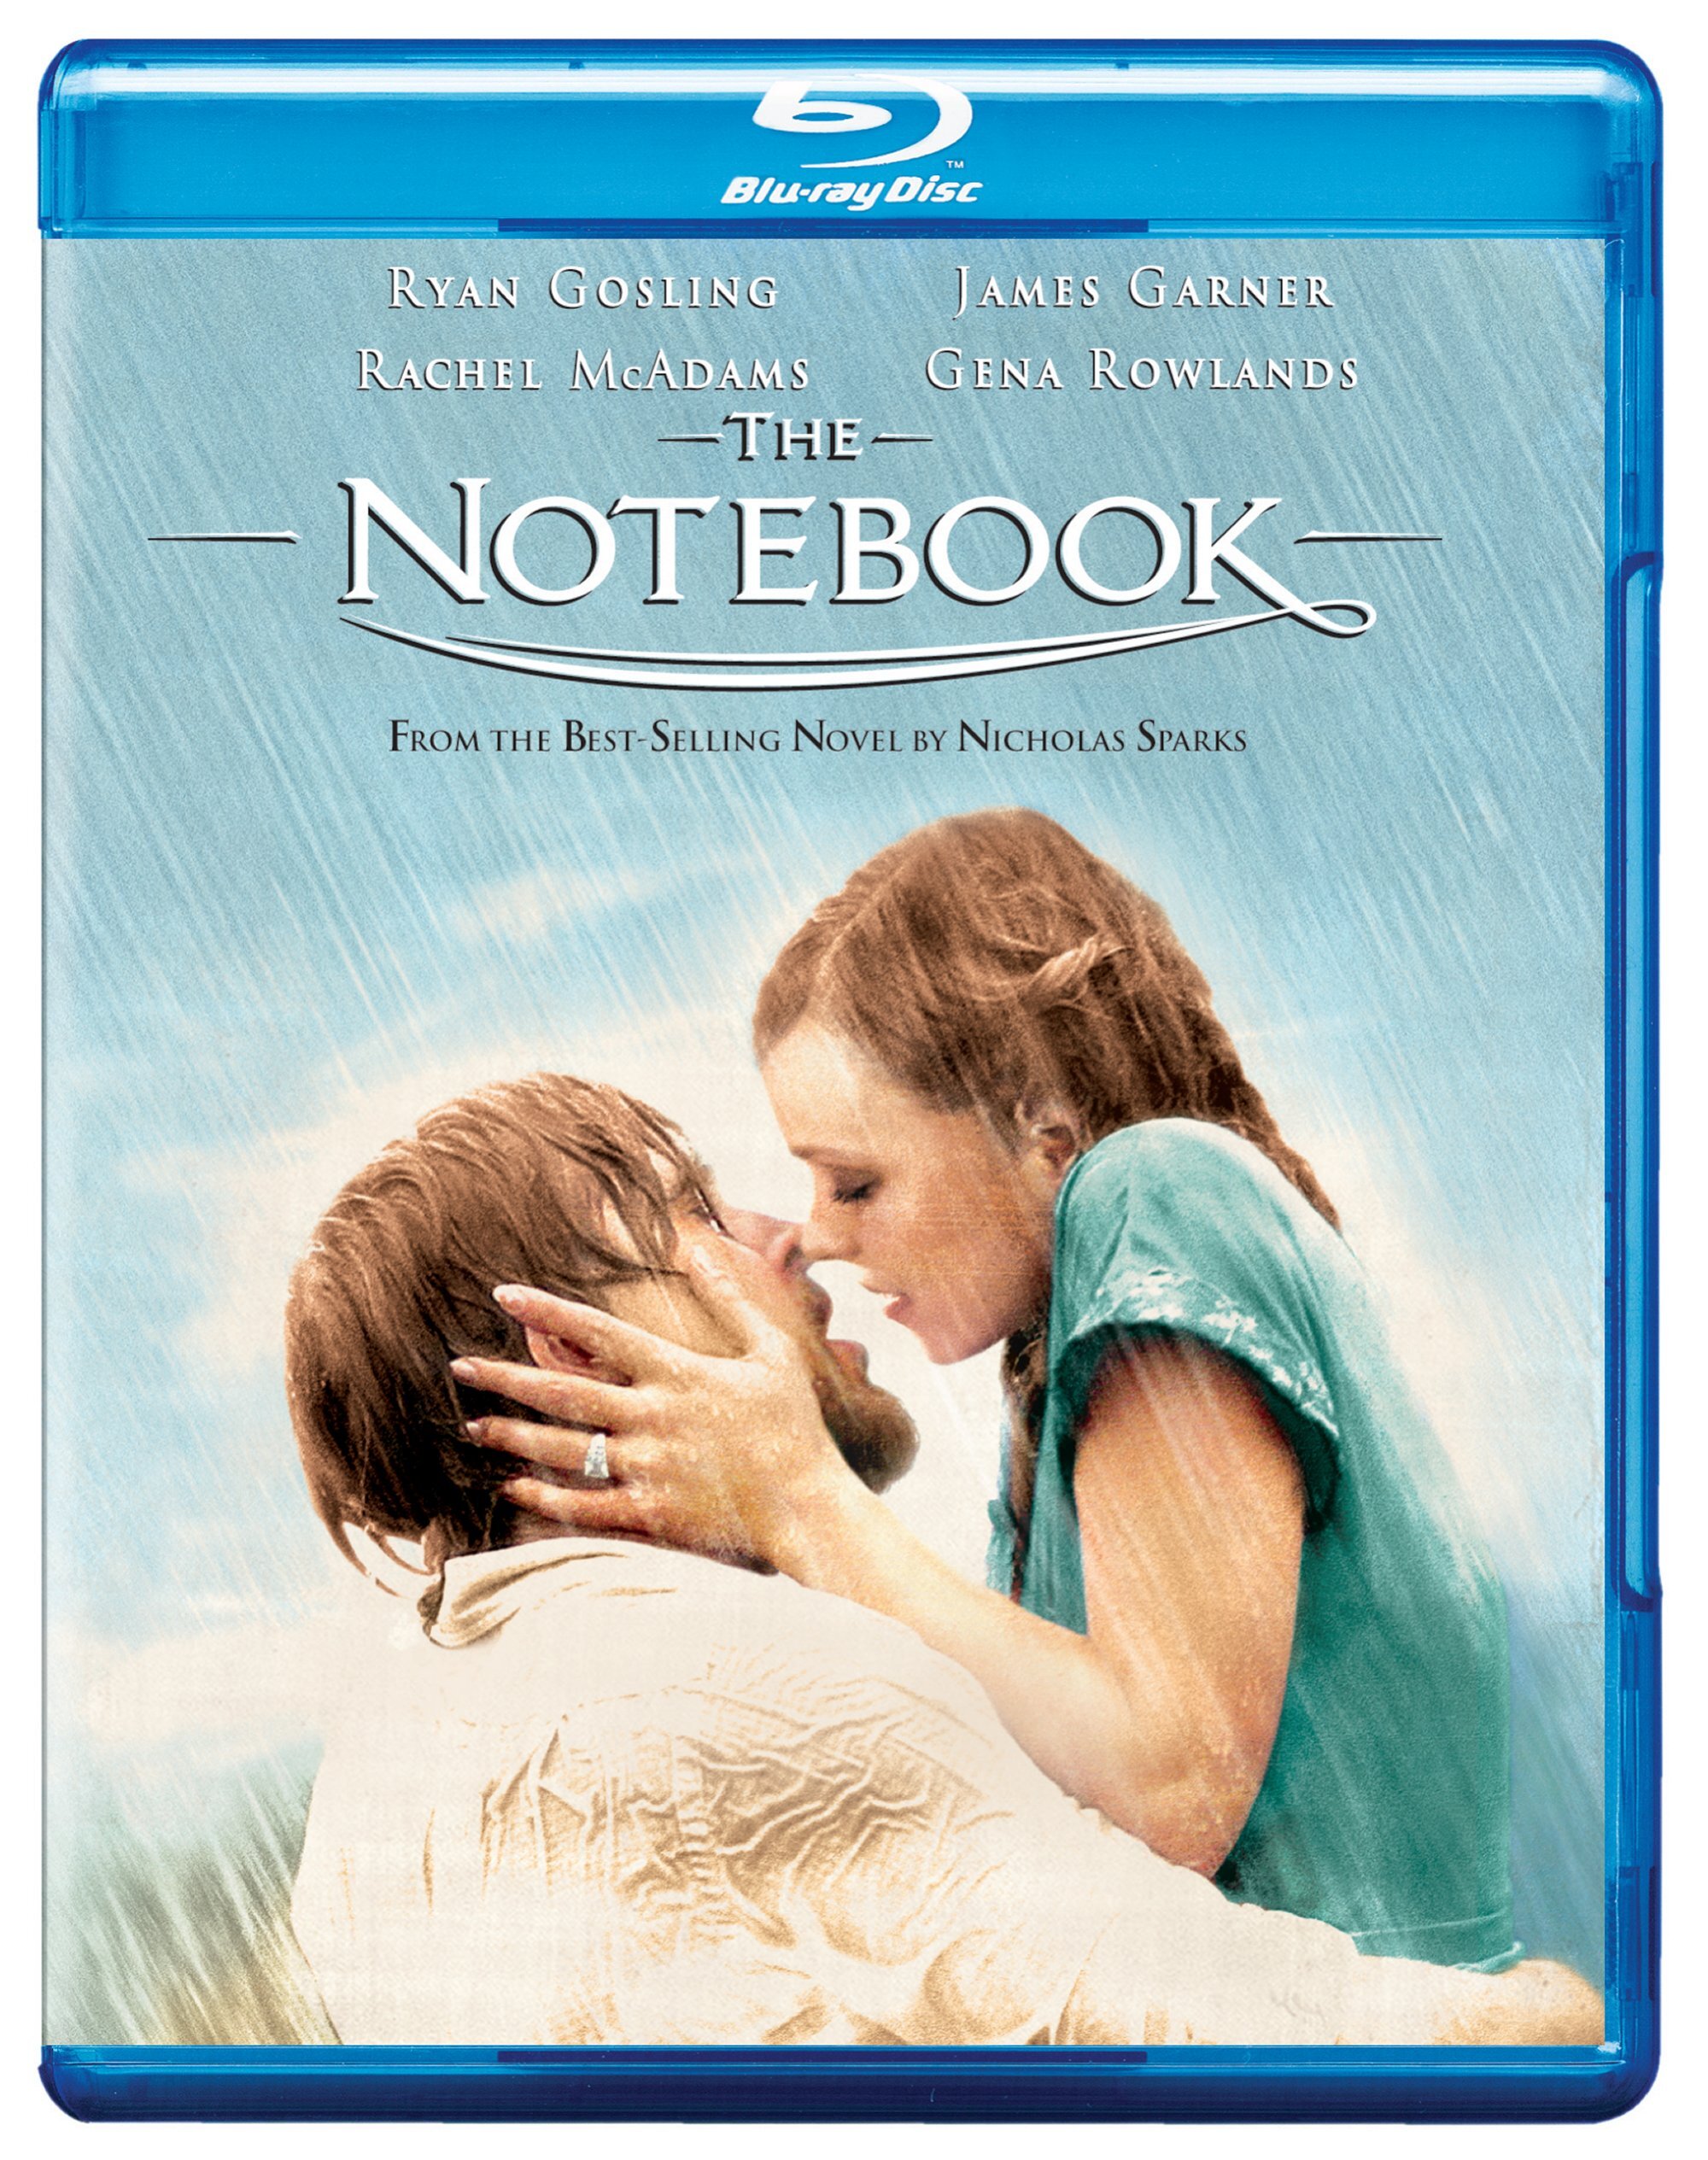 The Notebook (Blu-ray Special Edition) - Blu-ray [ 2004 ]  - Drama Movies On Blu-ray - Movies On GRUV